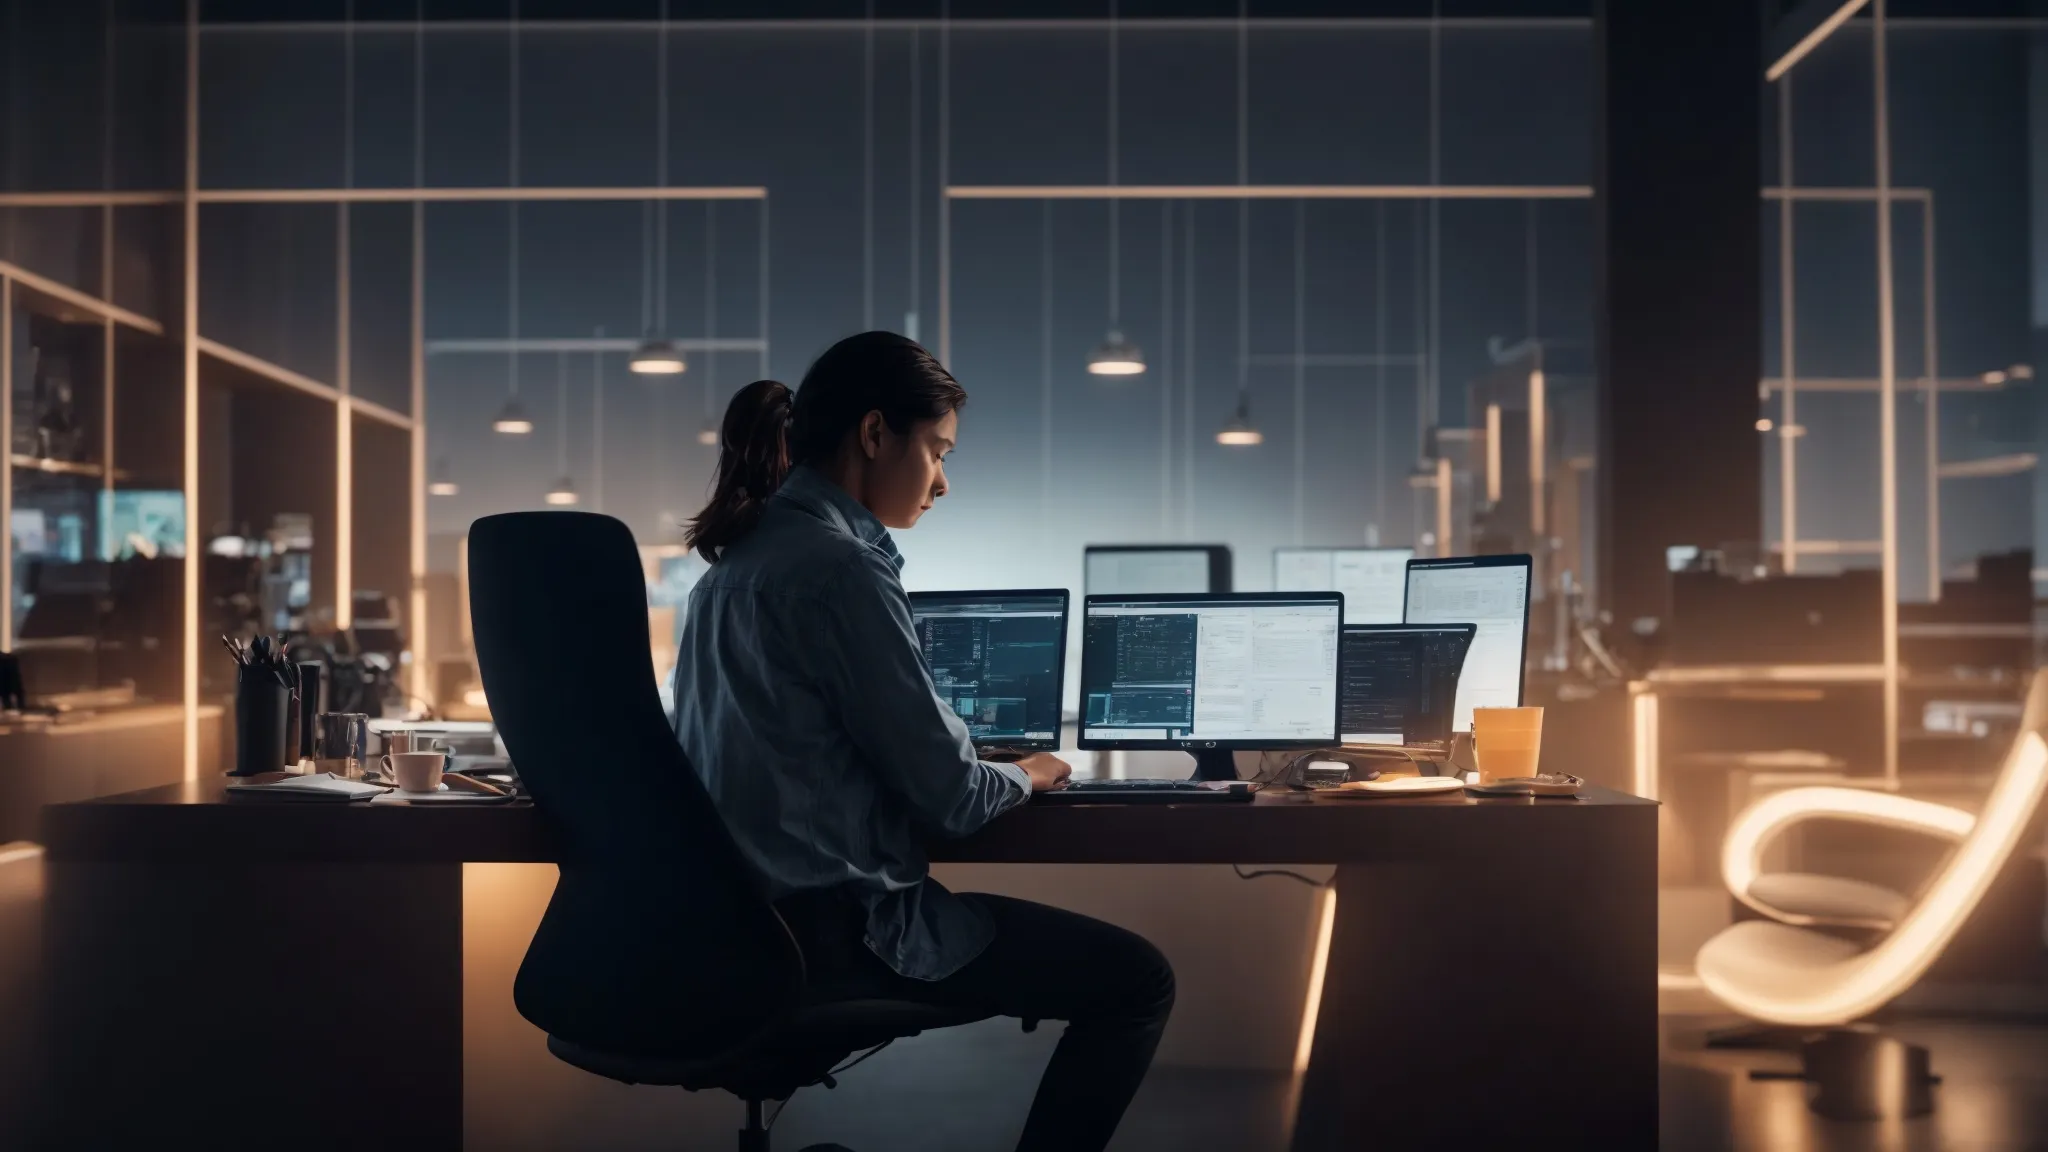 a person sits intently at a modern workspace, surrounded by high-tech devices, typing at a sleek computer under the soft glow of ambient lighting.